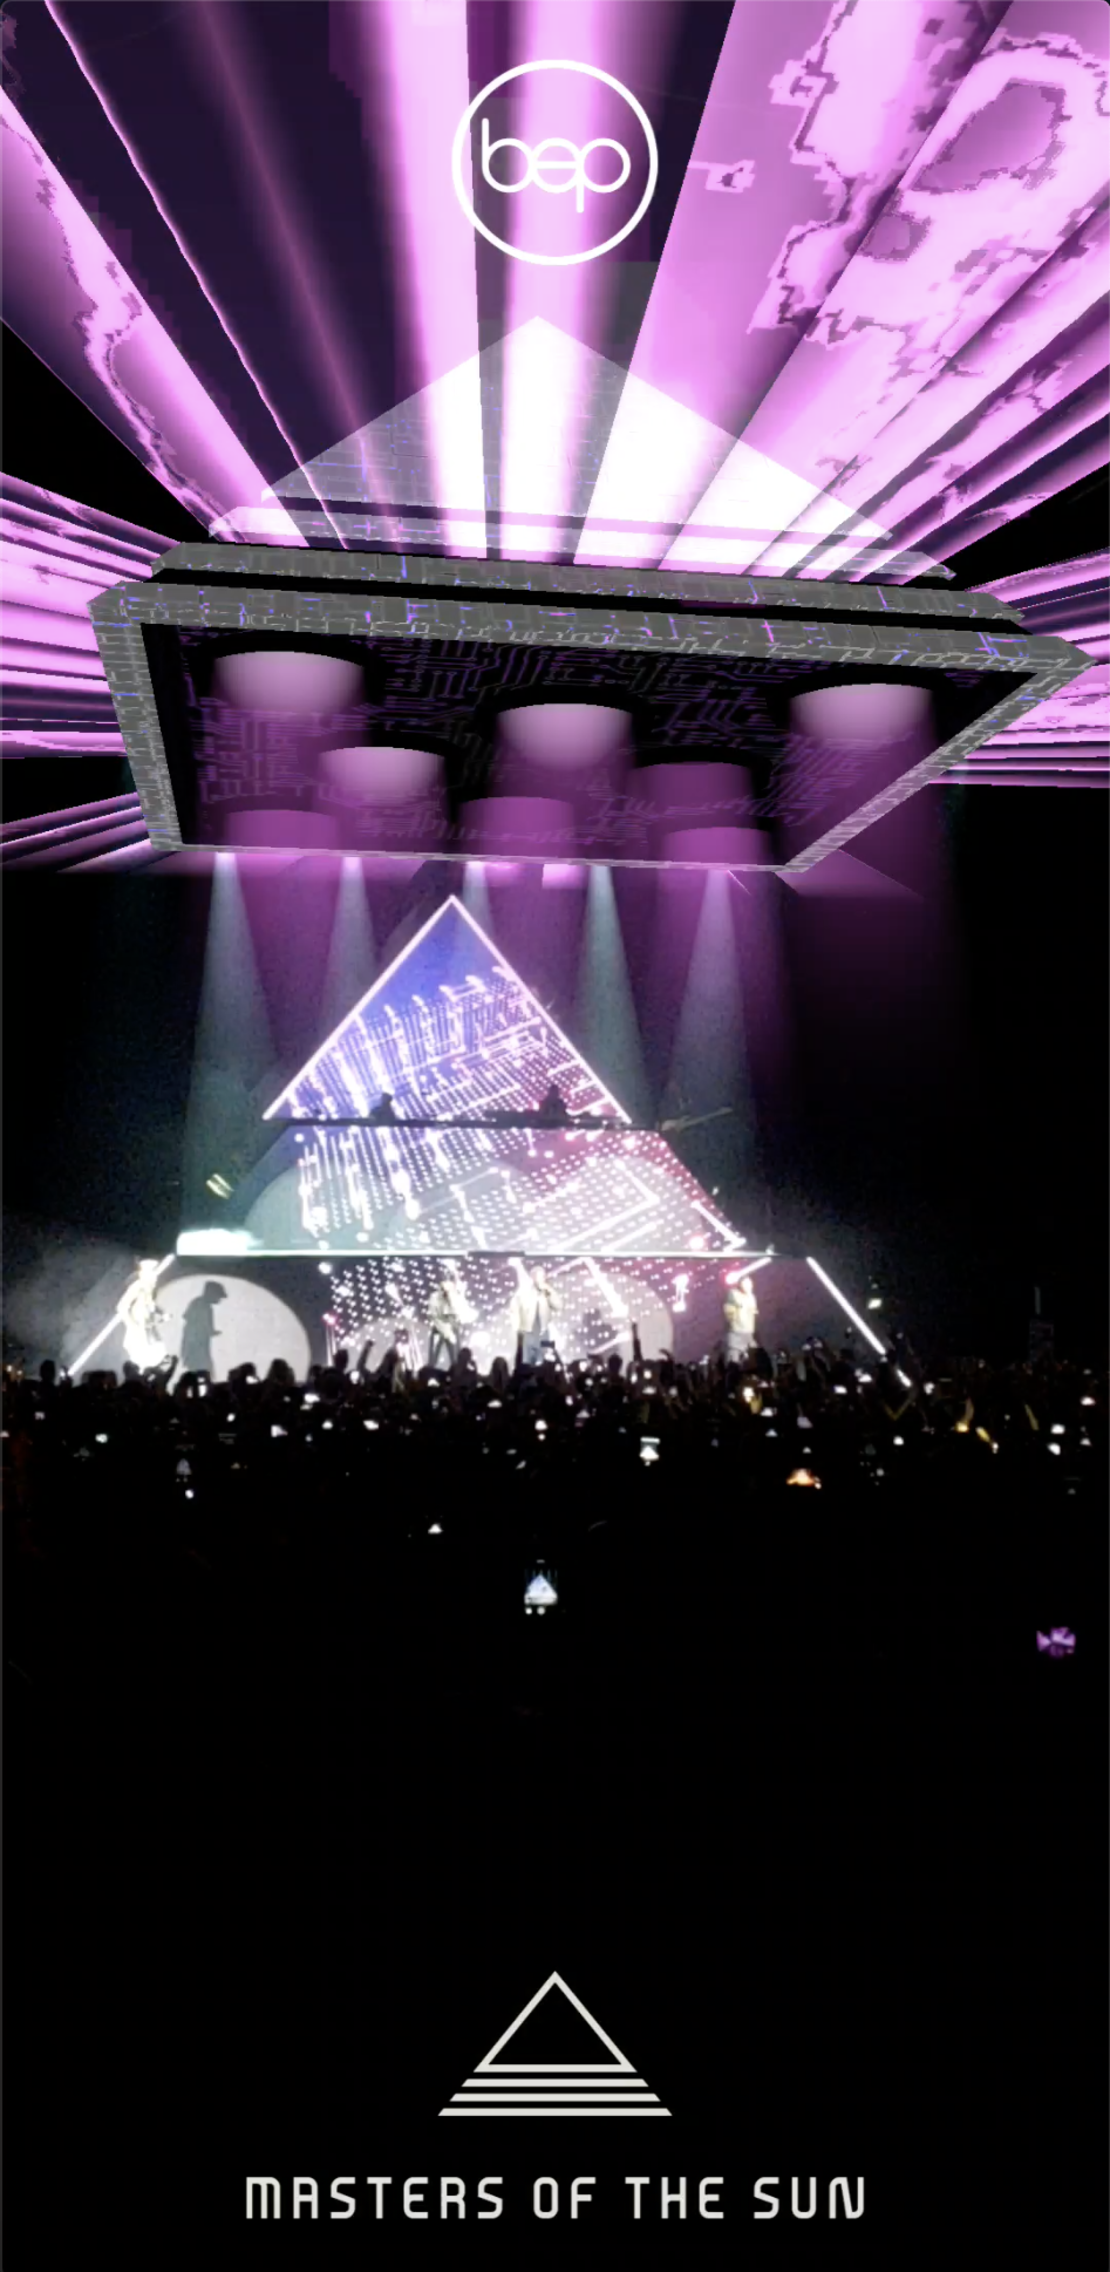 With and app specially designed for the Black Eyed Peas Masters of the Sun tour, viewers can add augmented reality graphics to the finale. 